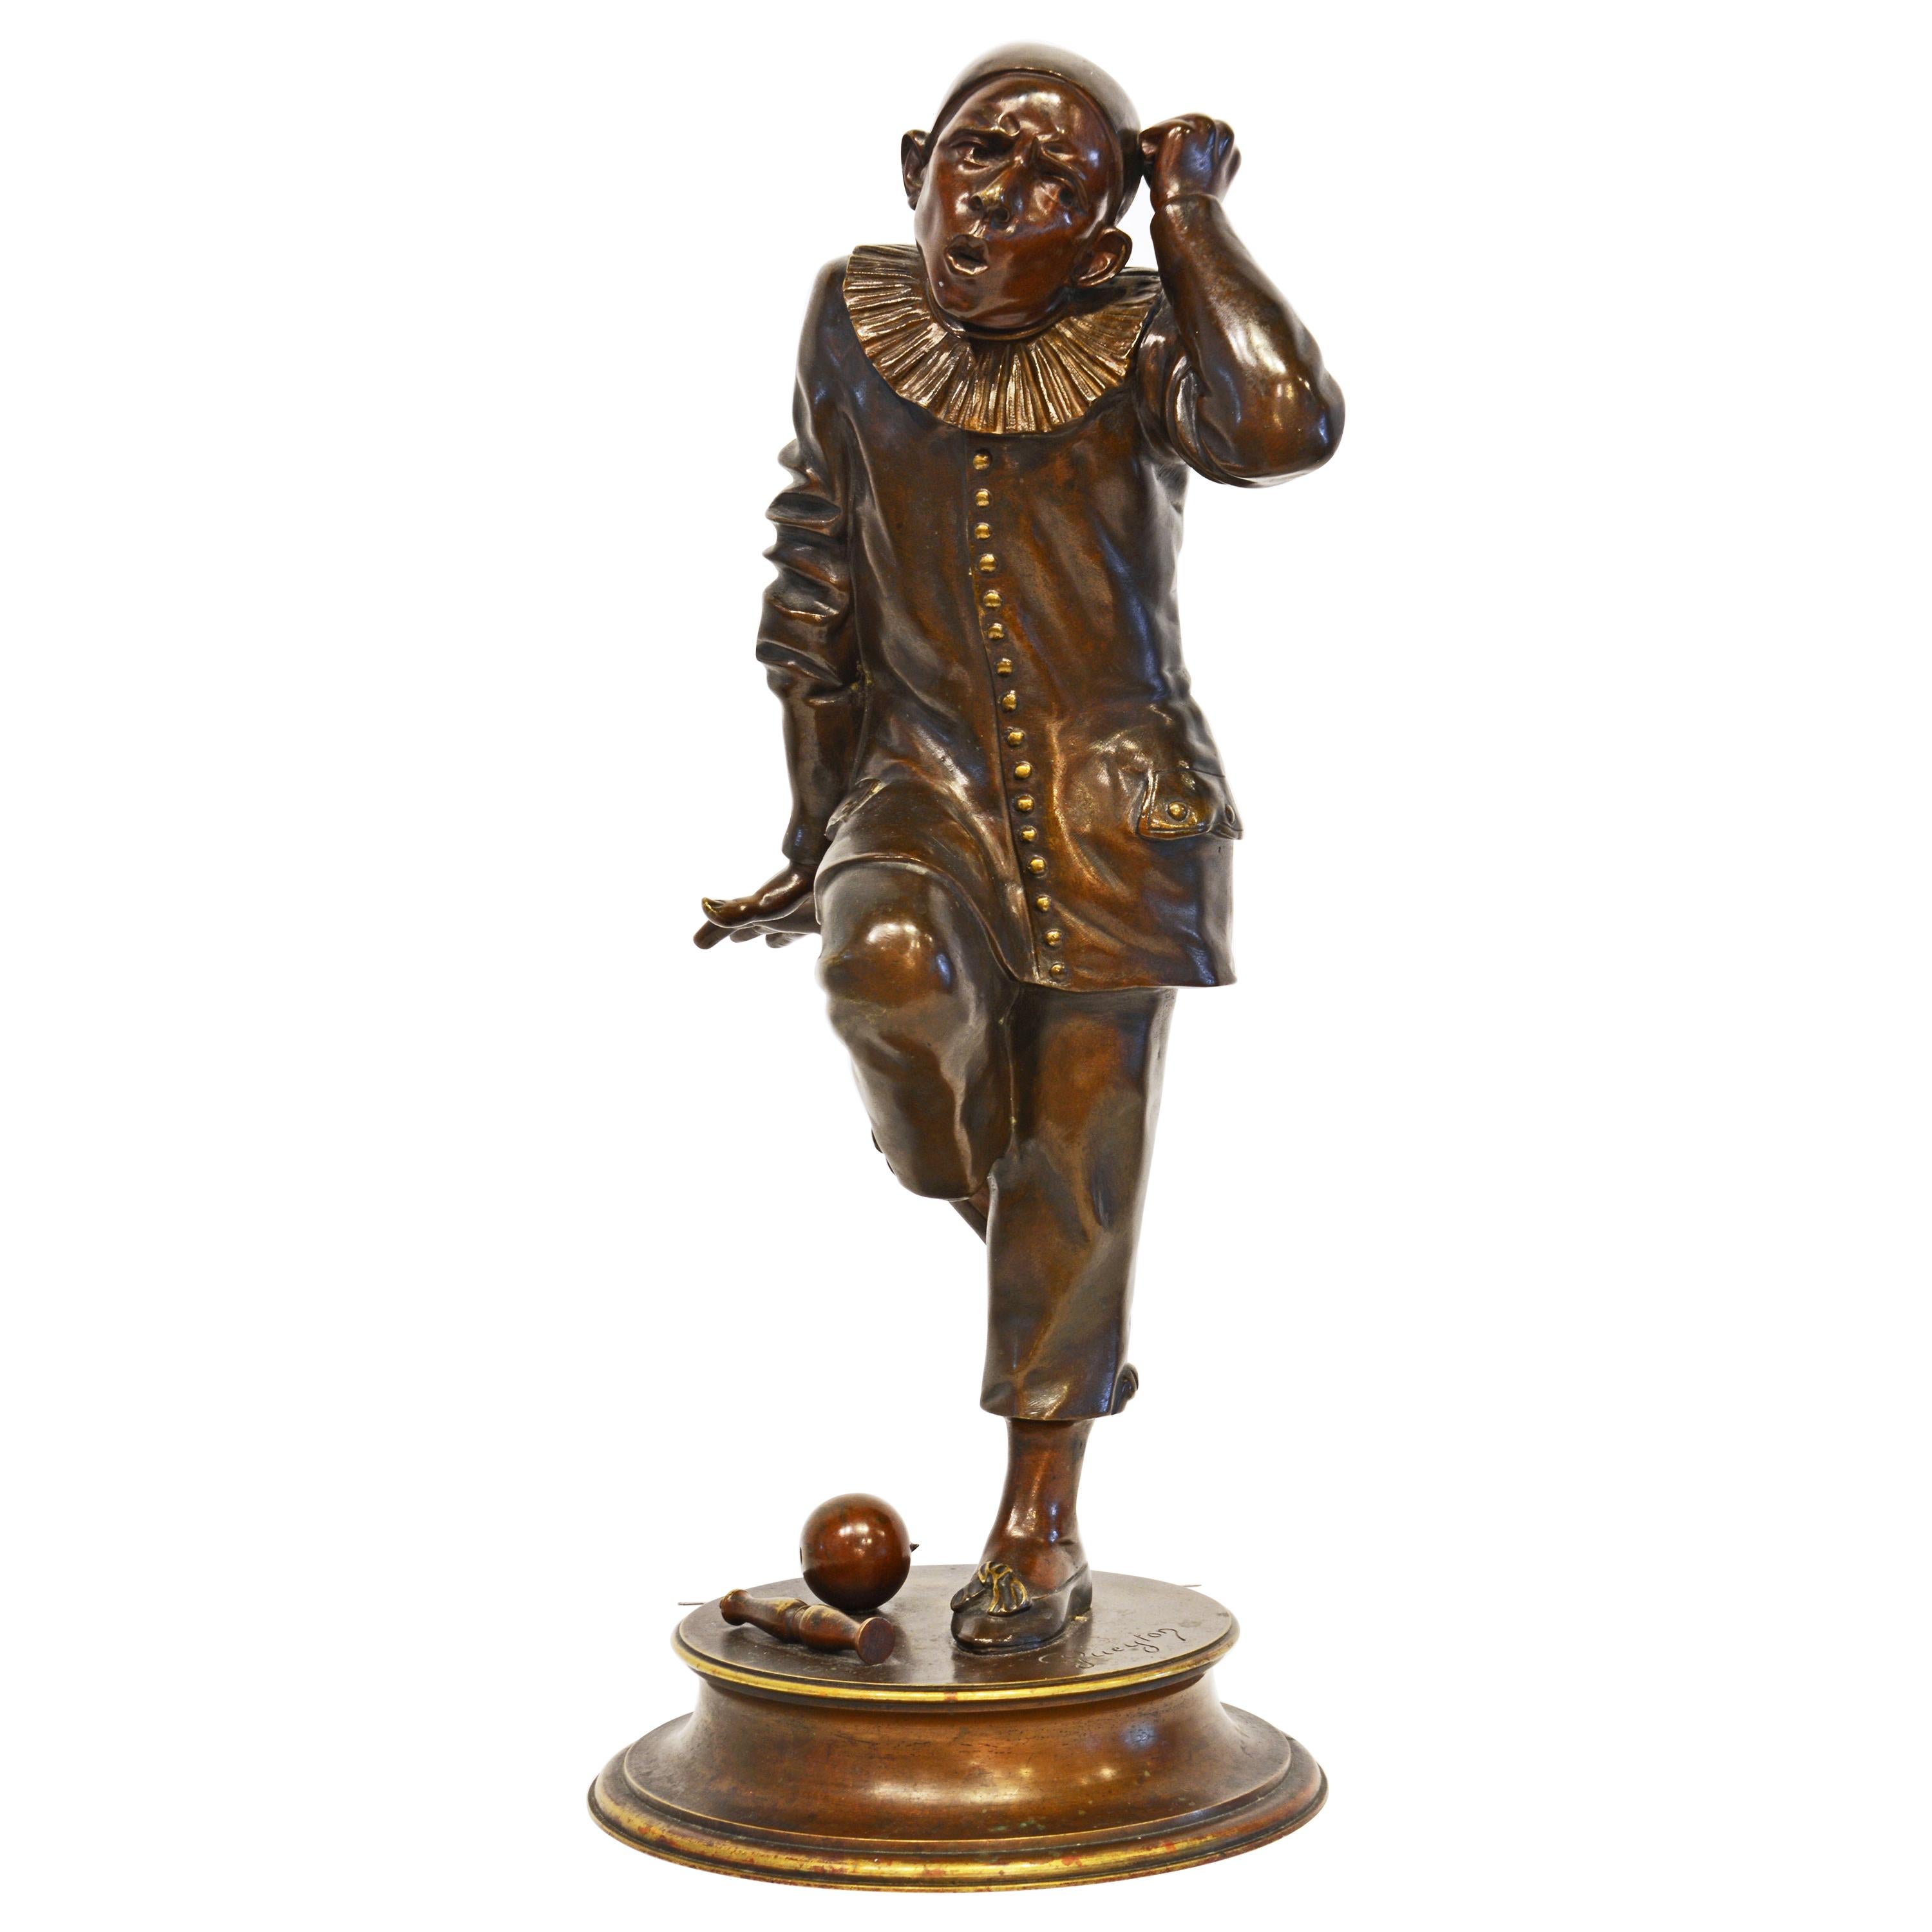 Bronze Sculpture of a Posing Jester or Harlequin by French Sculptor G. Gueyton